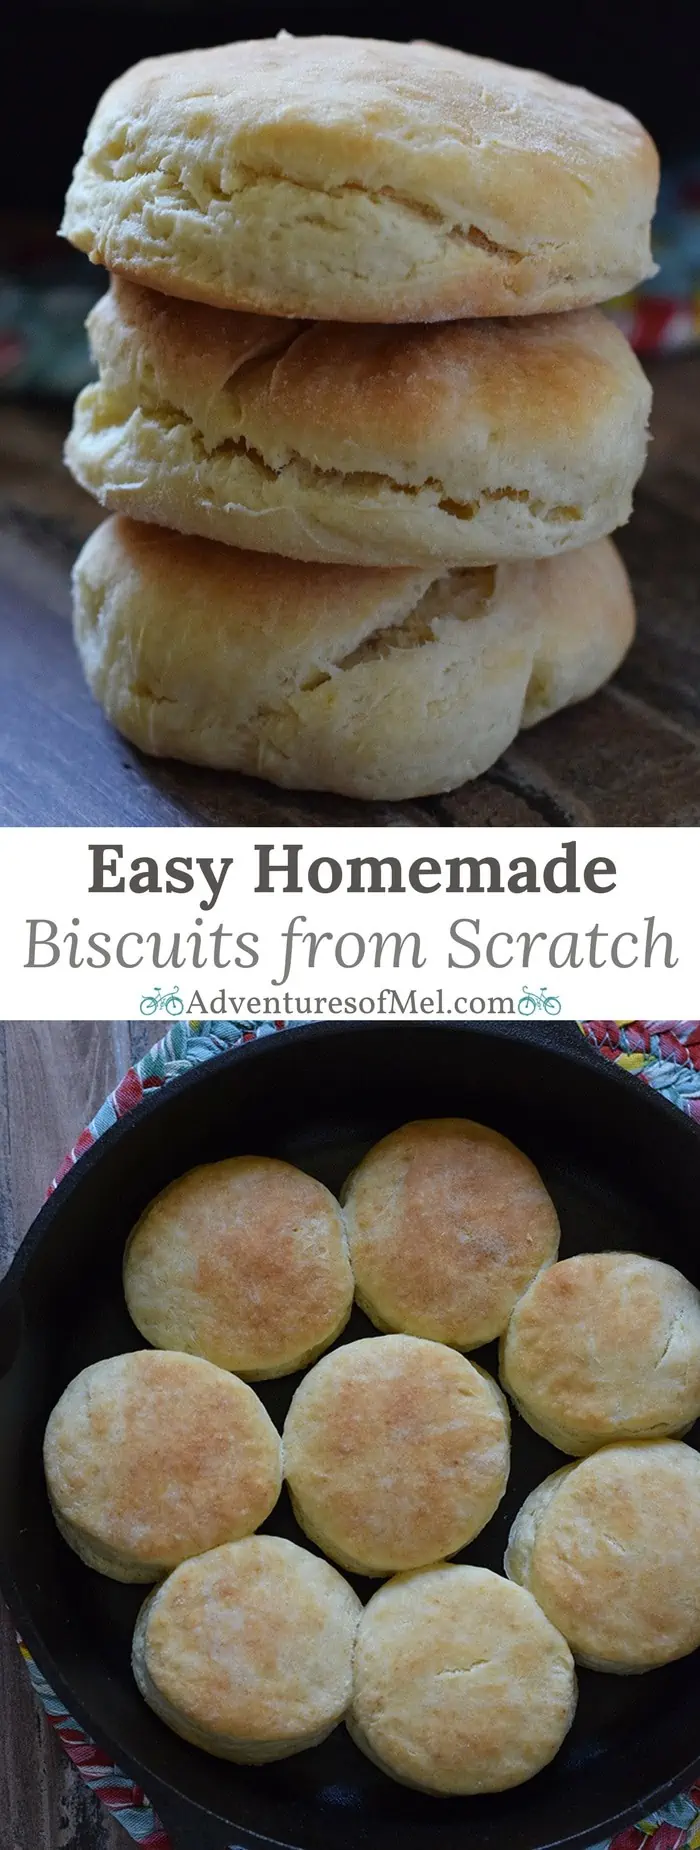 Easy homemade biscuits from scratch using only 5 simple ingredients. Quick recipe that's perfect for both breakfast and dinner.